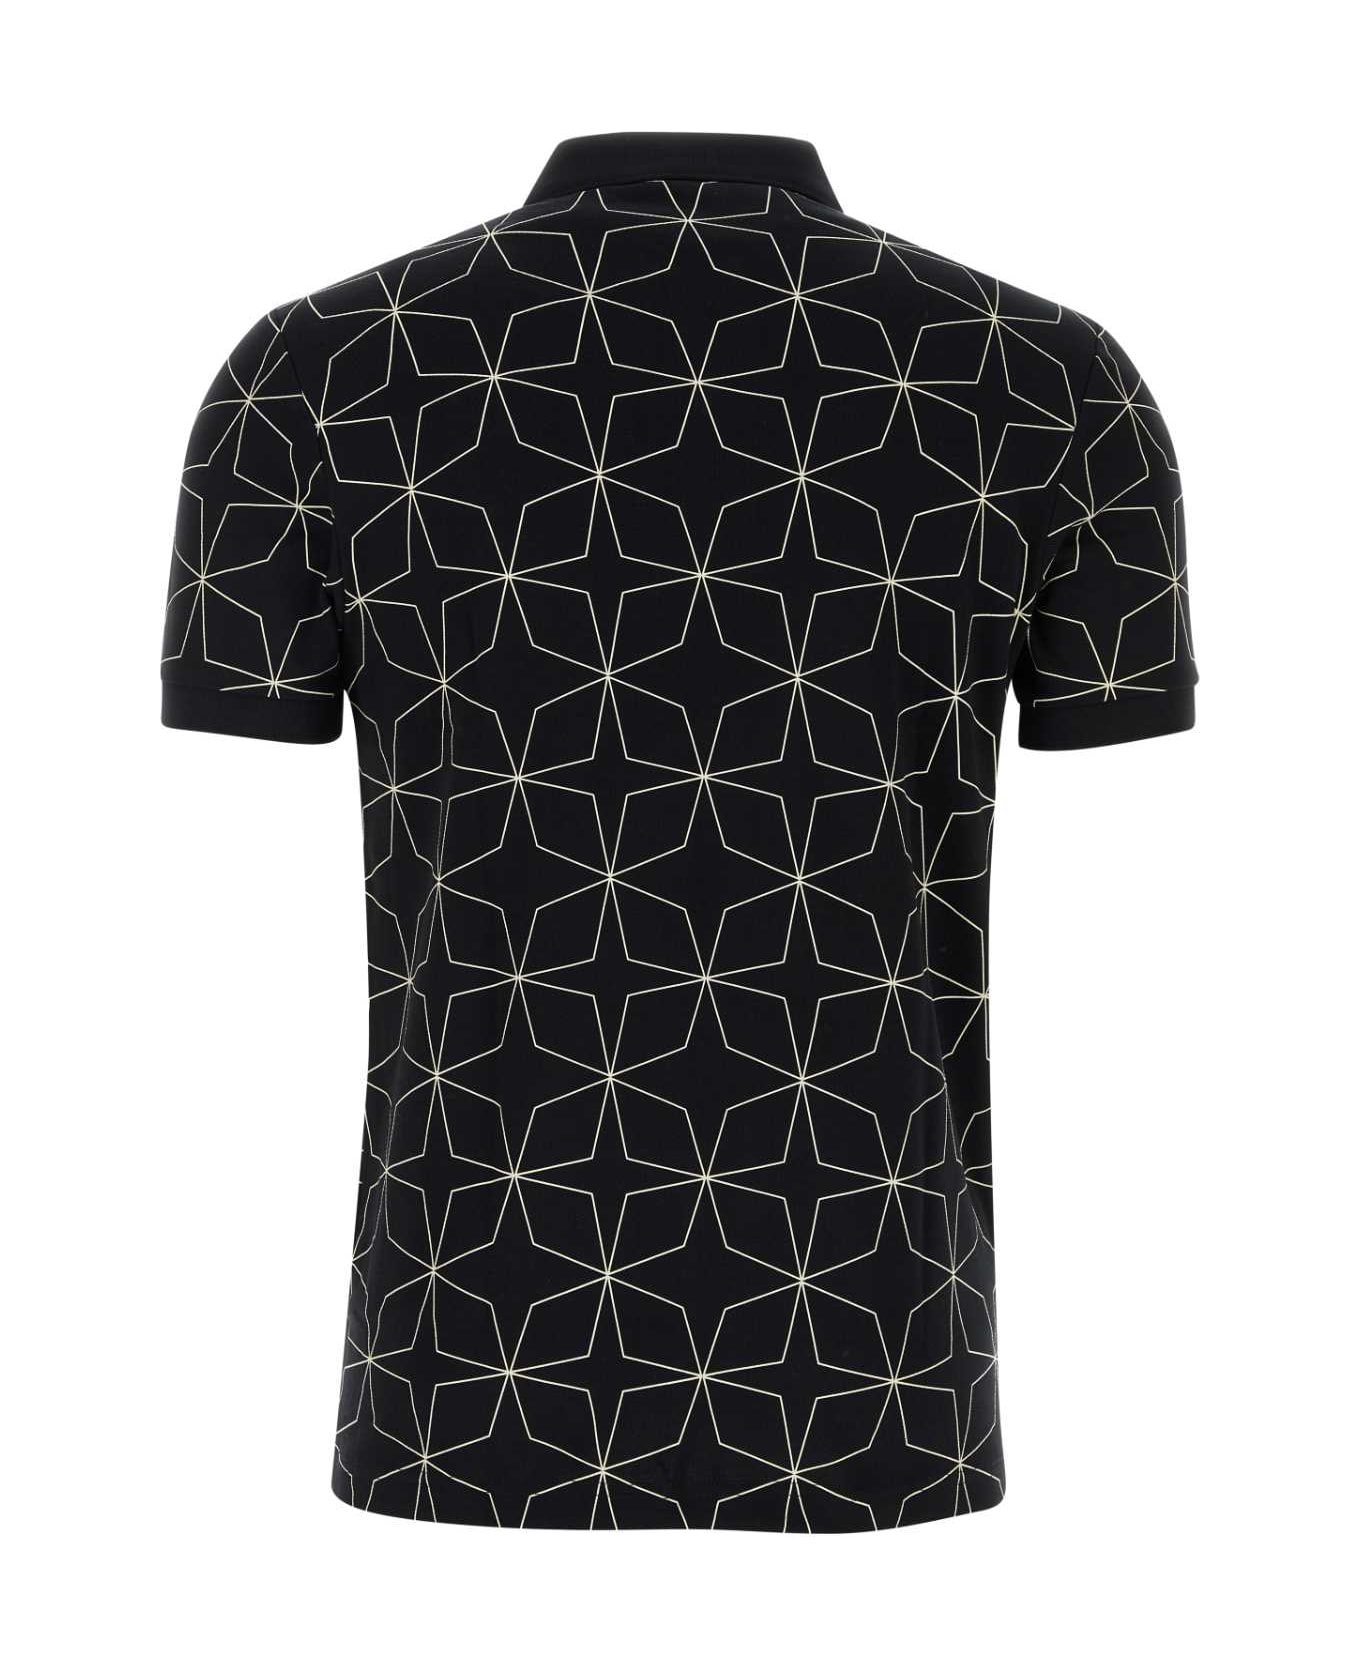 Fred Perry Printed Piquet Polo Shirt - 102 ポロシャツ